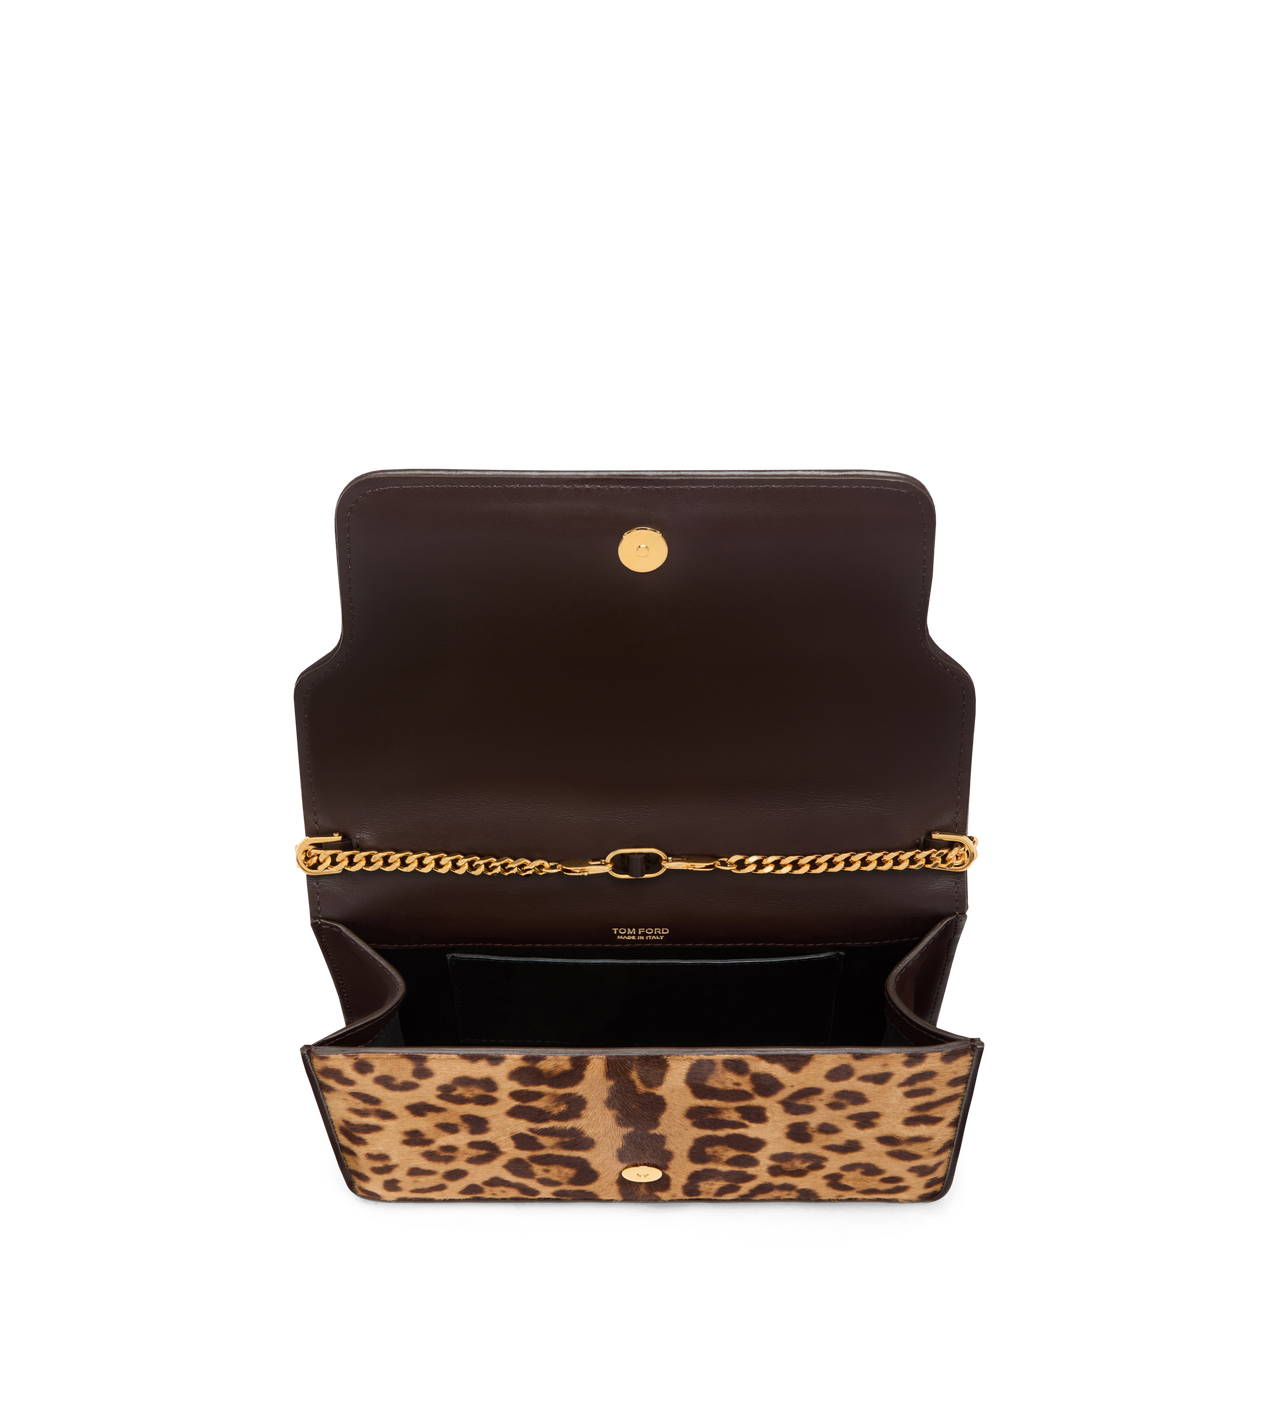 LEOPARD PRINT CALF HAIR WHITNEY SMALL SHOULDER BAG image number 3